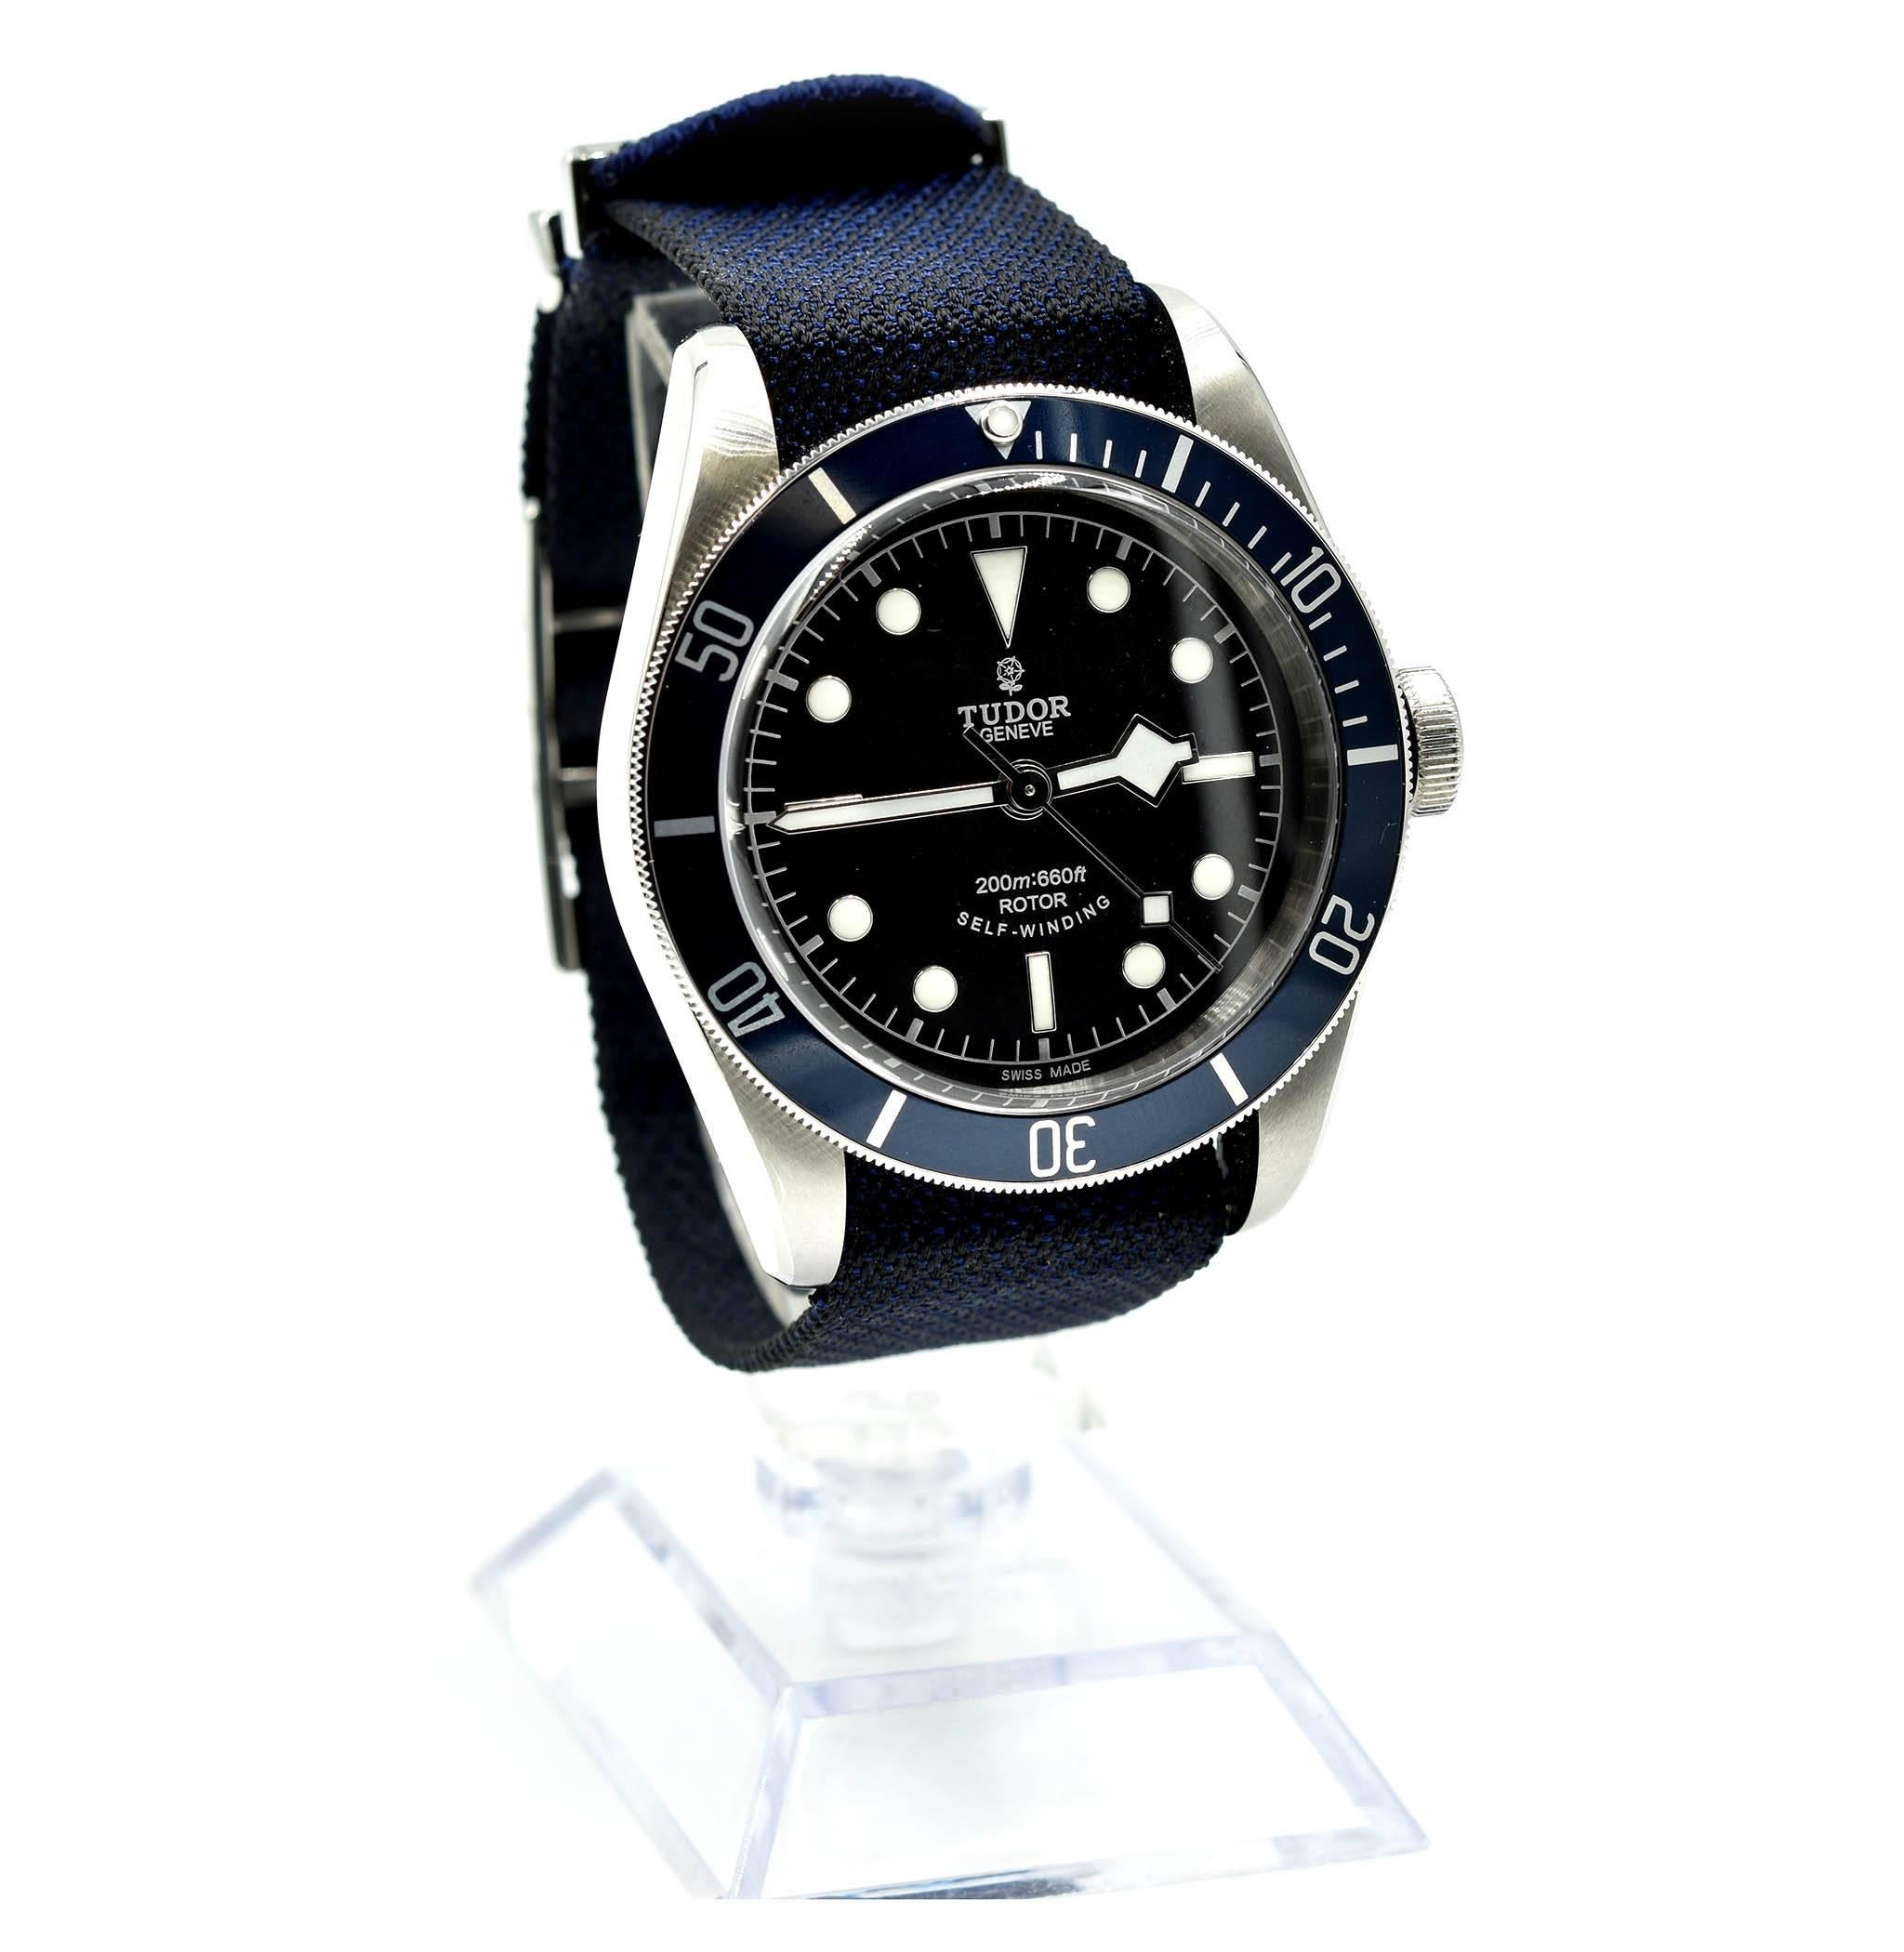 Movement: automatic
Function: hours, minutes, seconds
Case: 41mm stainless steel case, navy-blue bezel, screw-down crown 
Band: navy-blue nato strap with steel buckle
Dial: black dial with silver luminescent hands, luminescent dot hour markers,